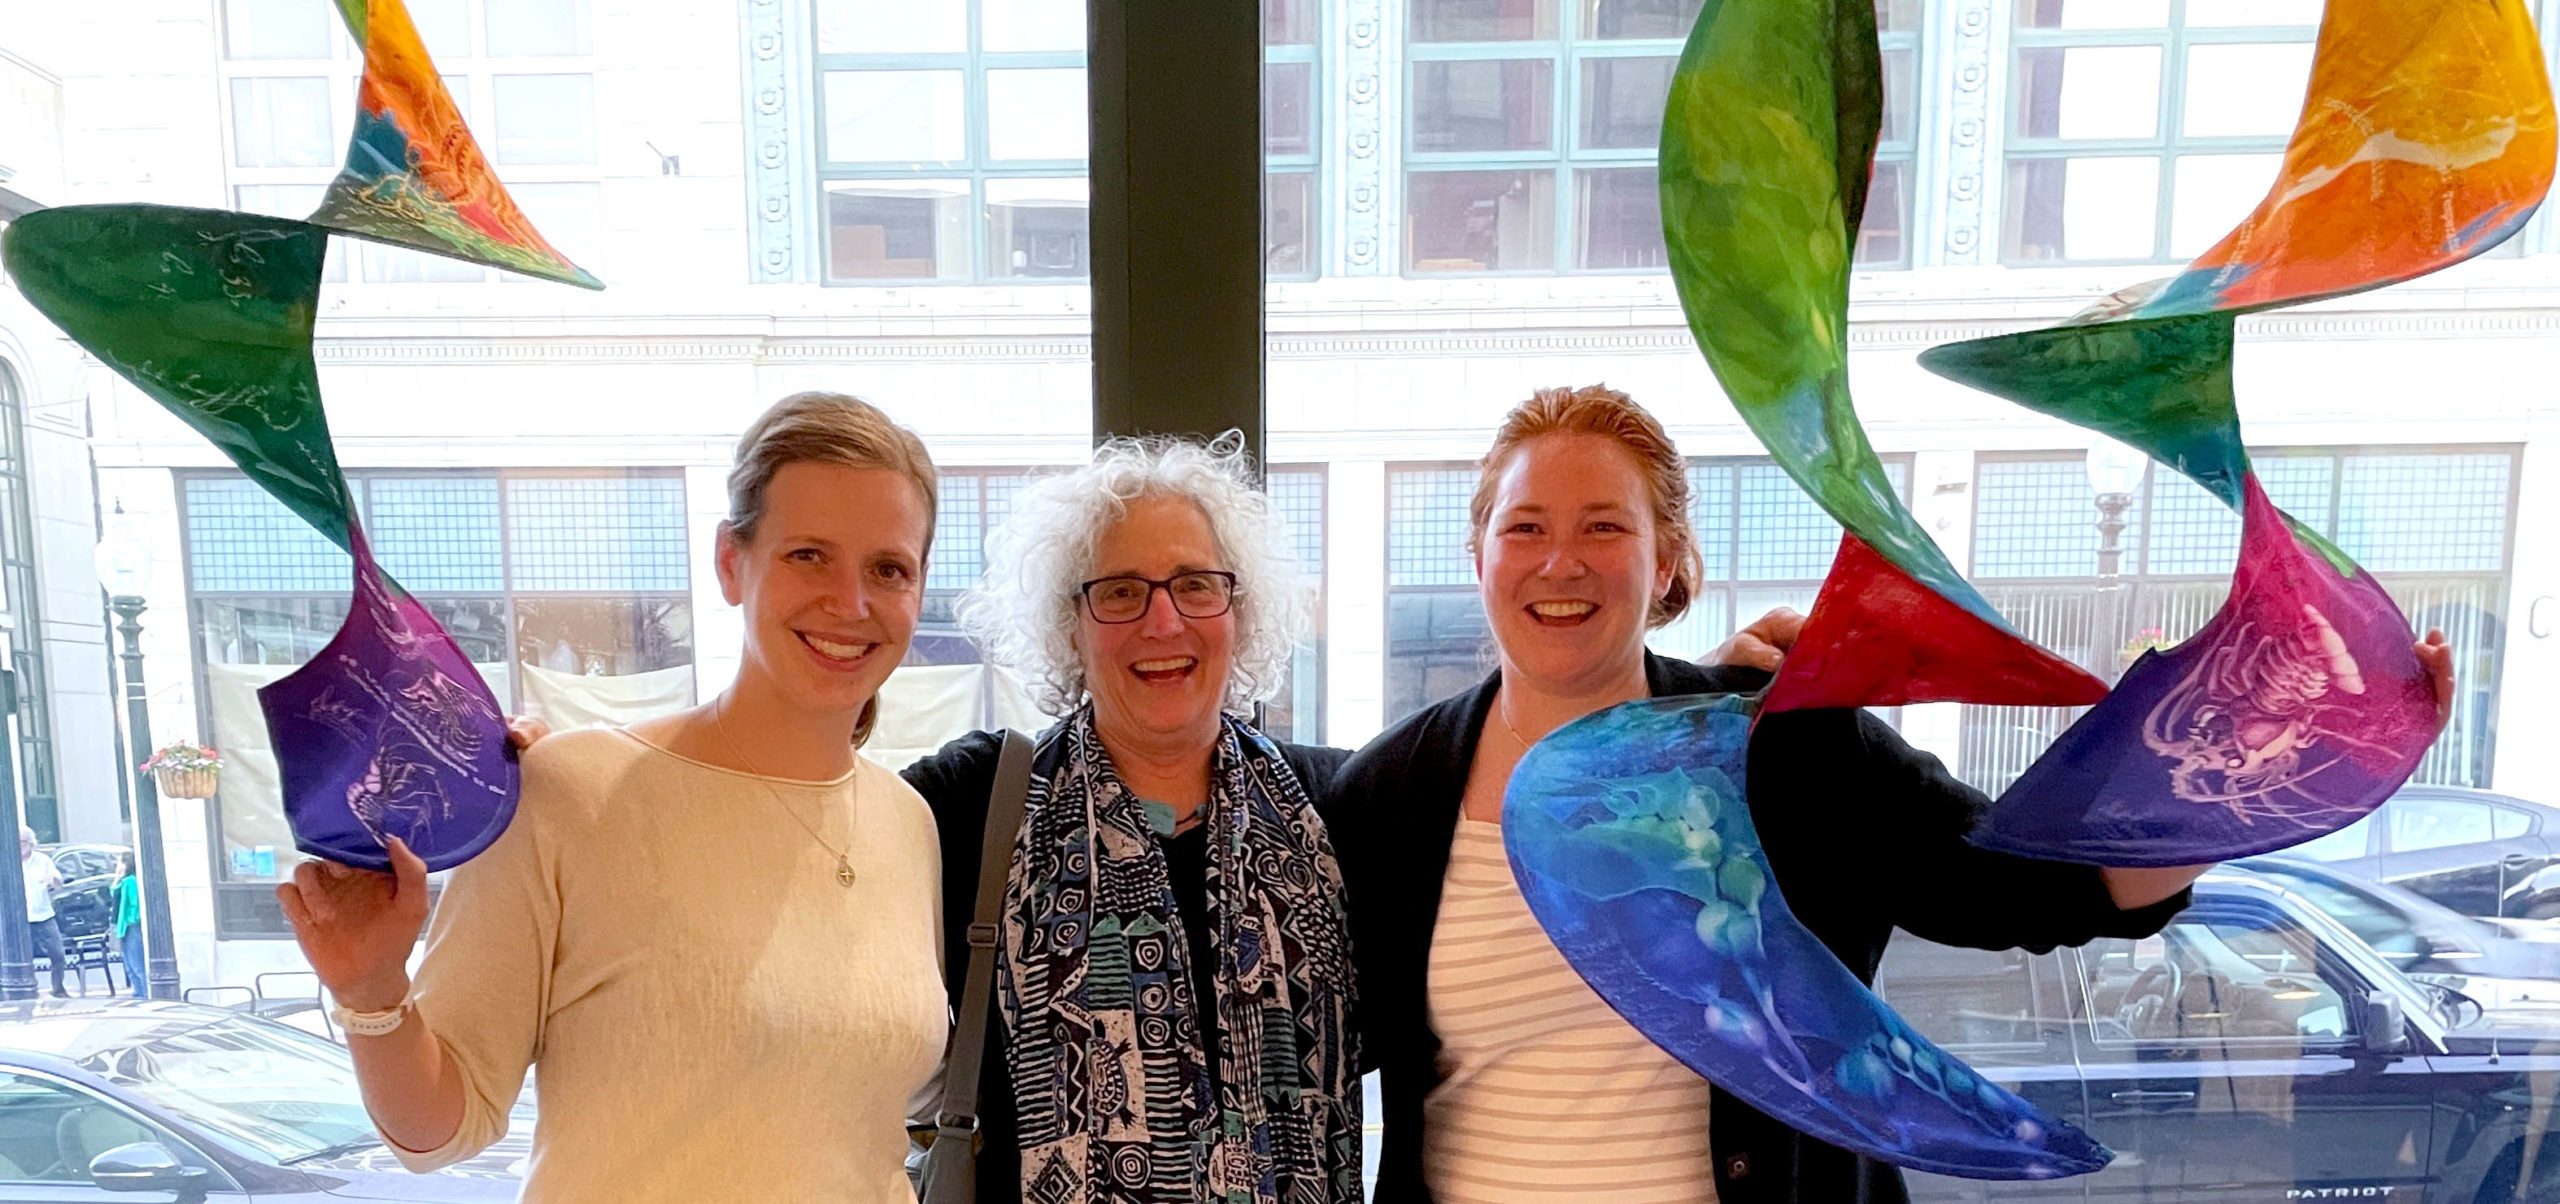 From left to right, WHOI post-doc Svenja Ryan, artist Deb Ehrens, and physical oceanographer Caroline Ummenhofer, with Ehrens' sculpture "Marine Heatwaves" on display at South Coast Design in June 2021. (Photo by Adrian Burke)